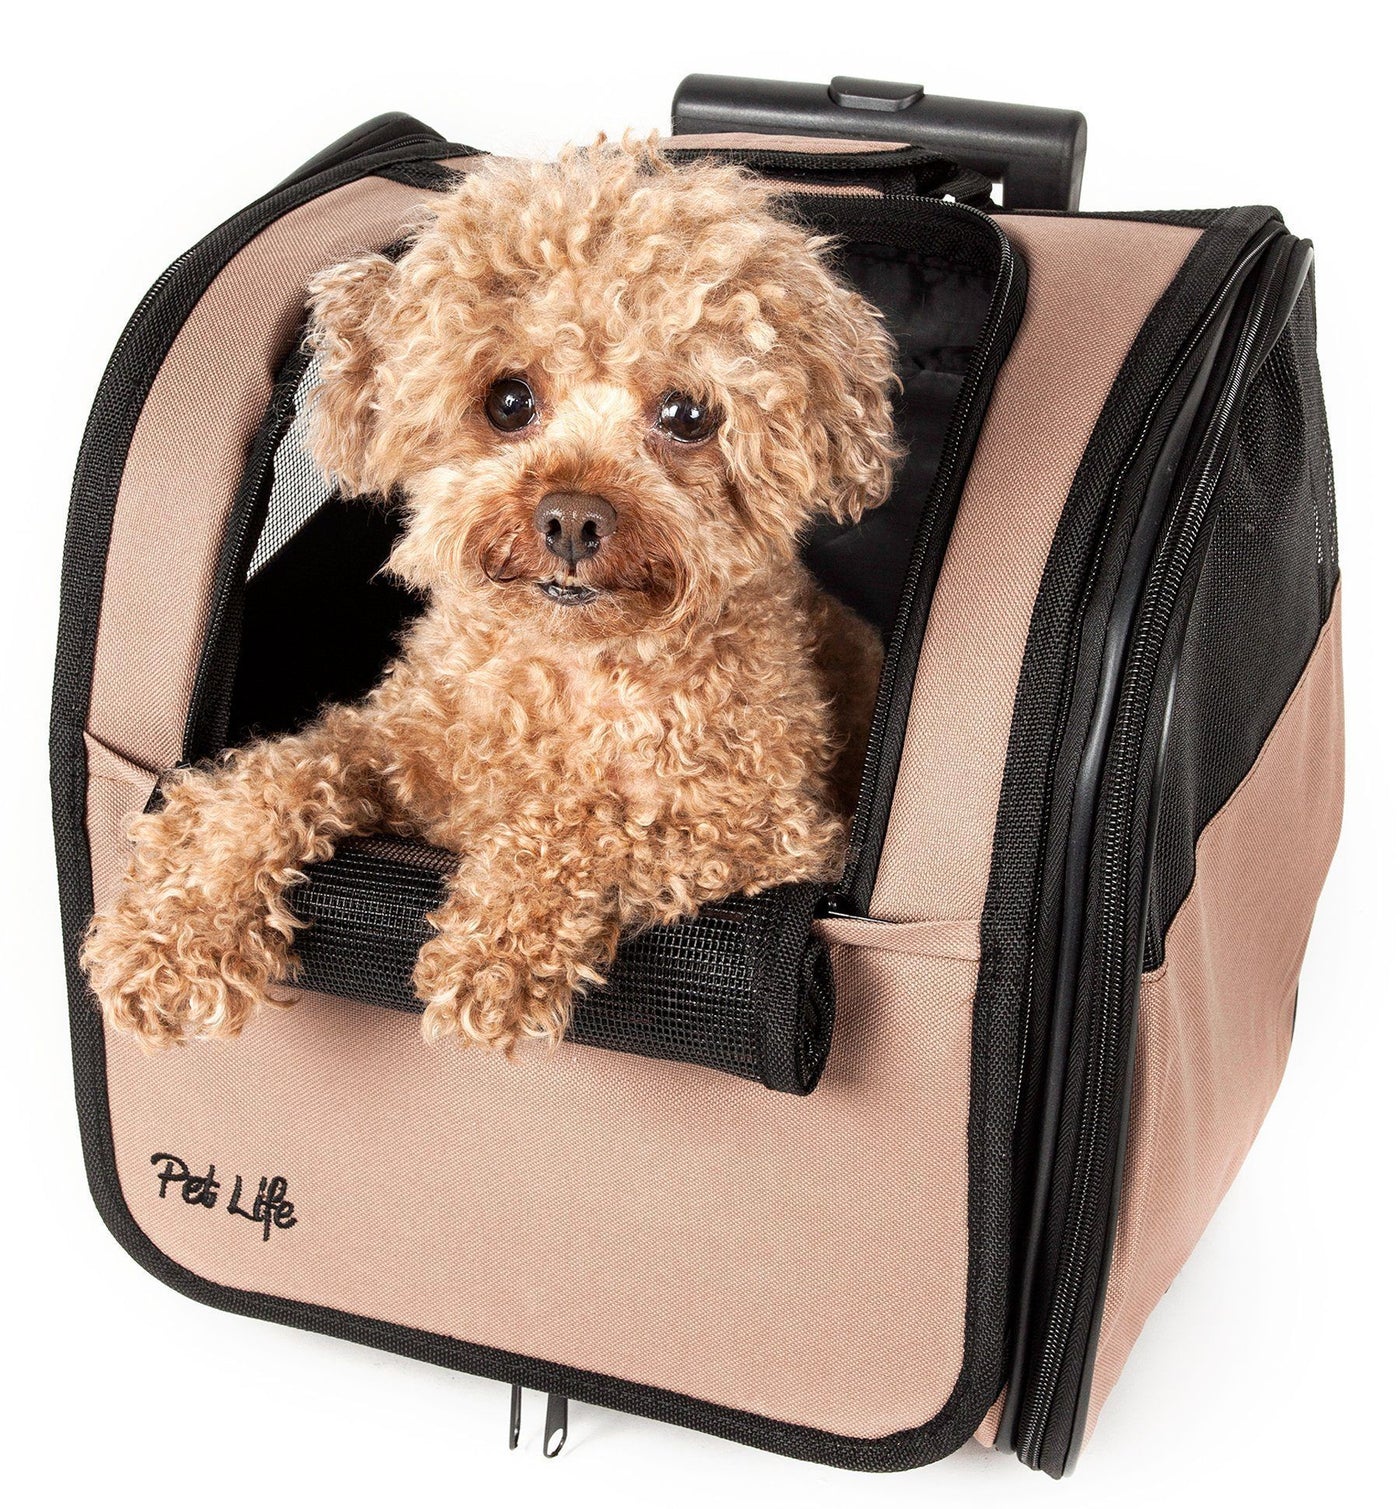 RUFF LIFE Airline Approved Expandable Premium Pet Carrier on Wheels- Two  Sided Expandable Rolling Carrier- Designed for Dogs & Cats- Extra Spacious